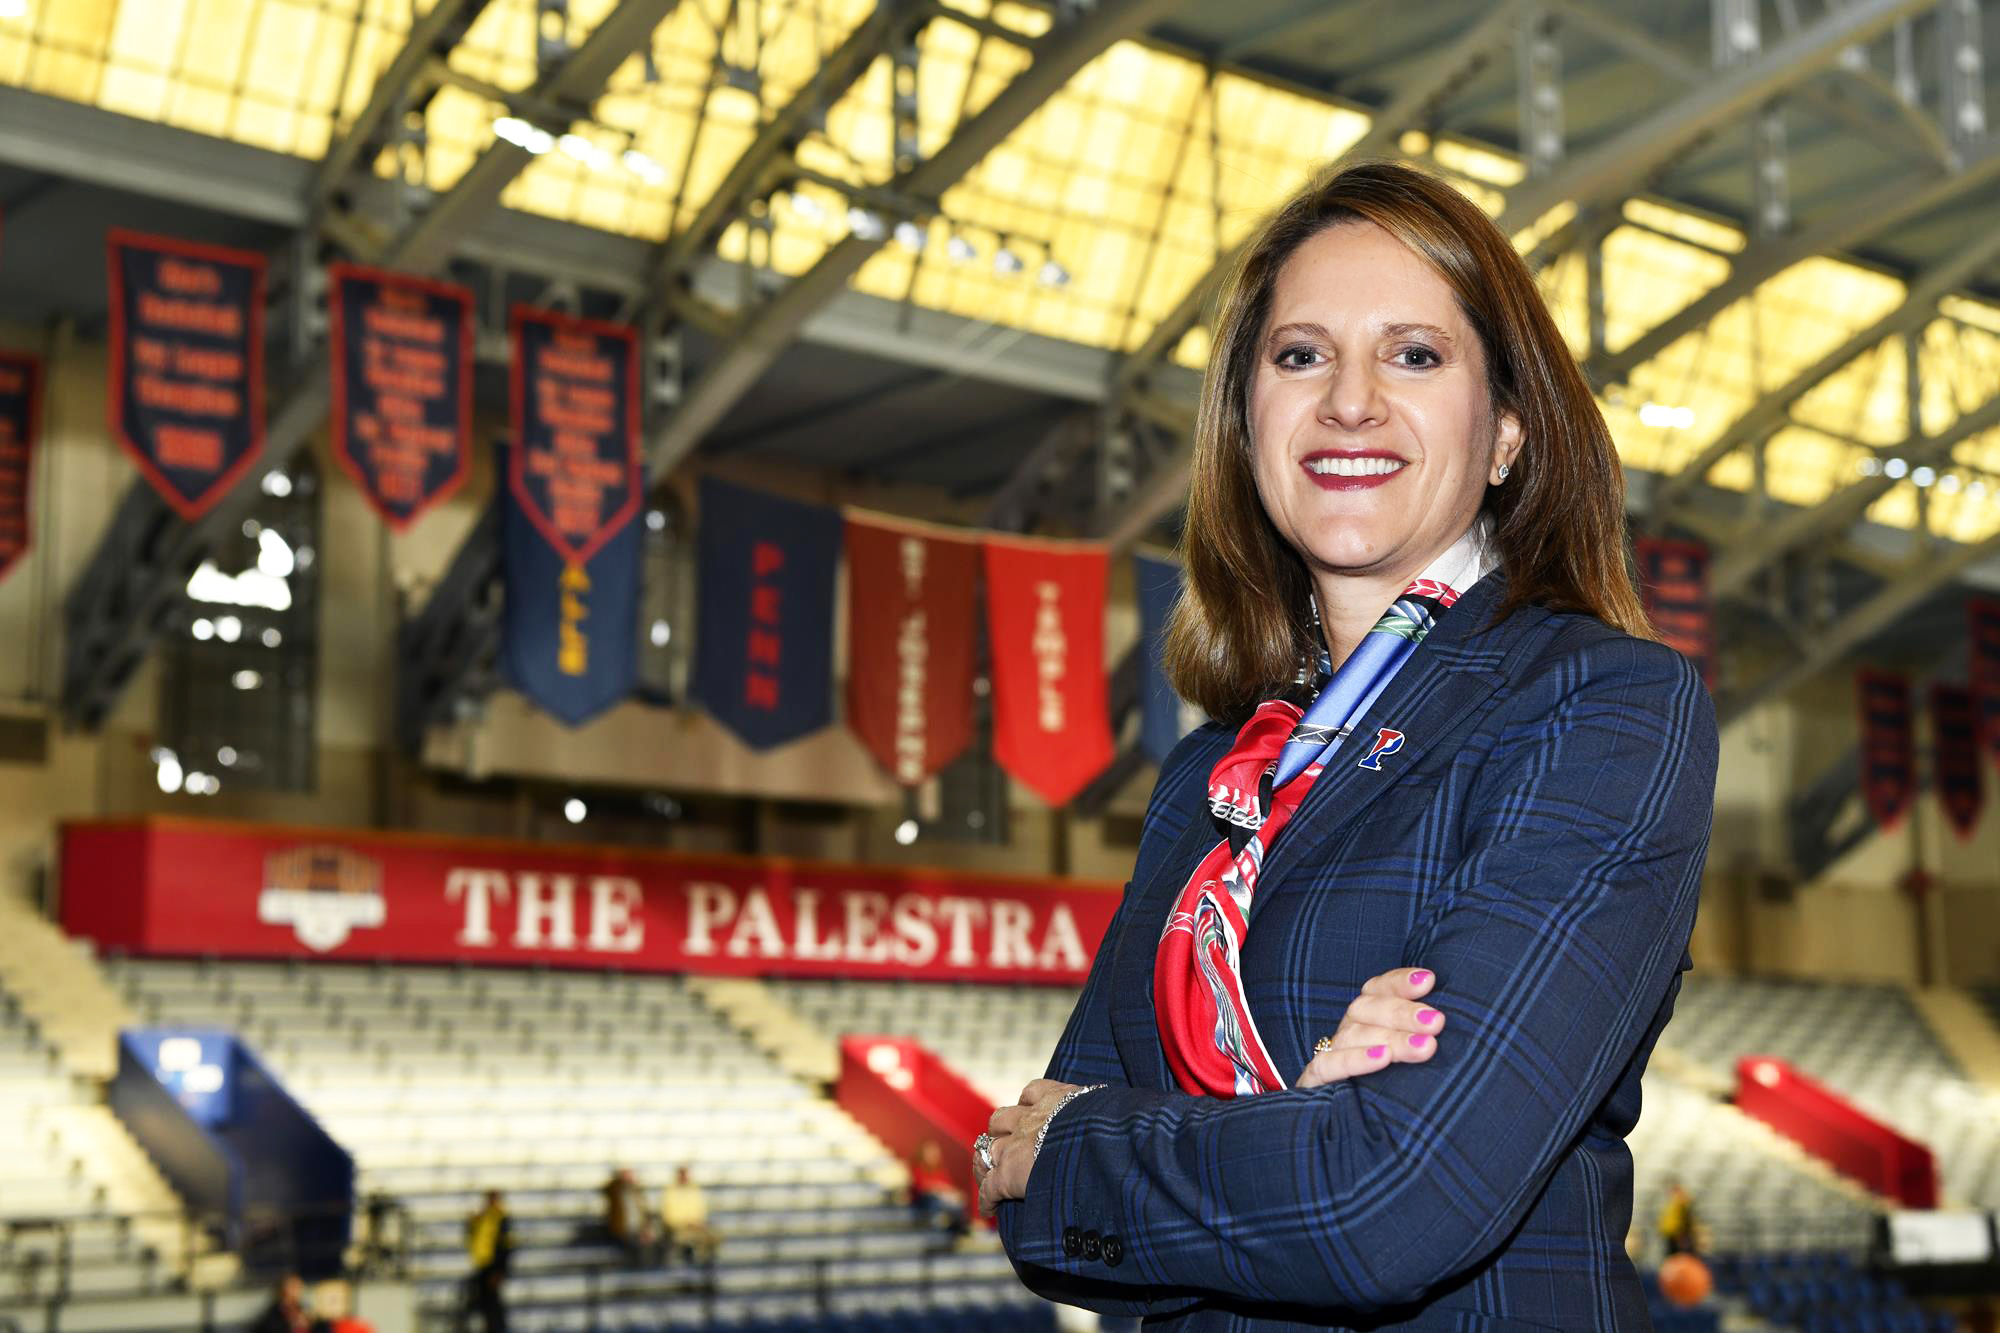 AD Grace Calhoun poses in the Palestra.